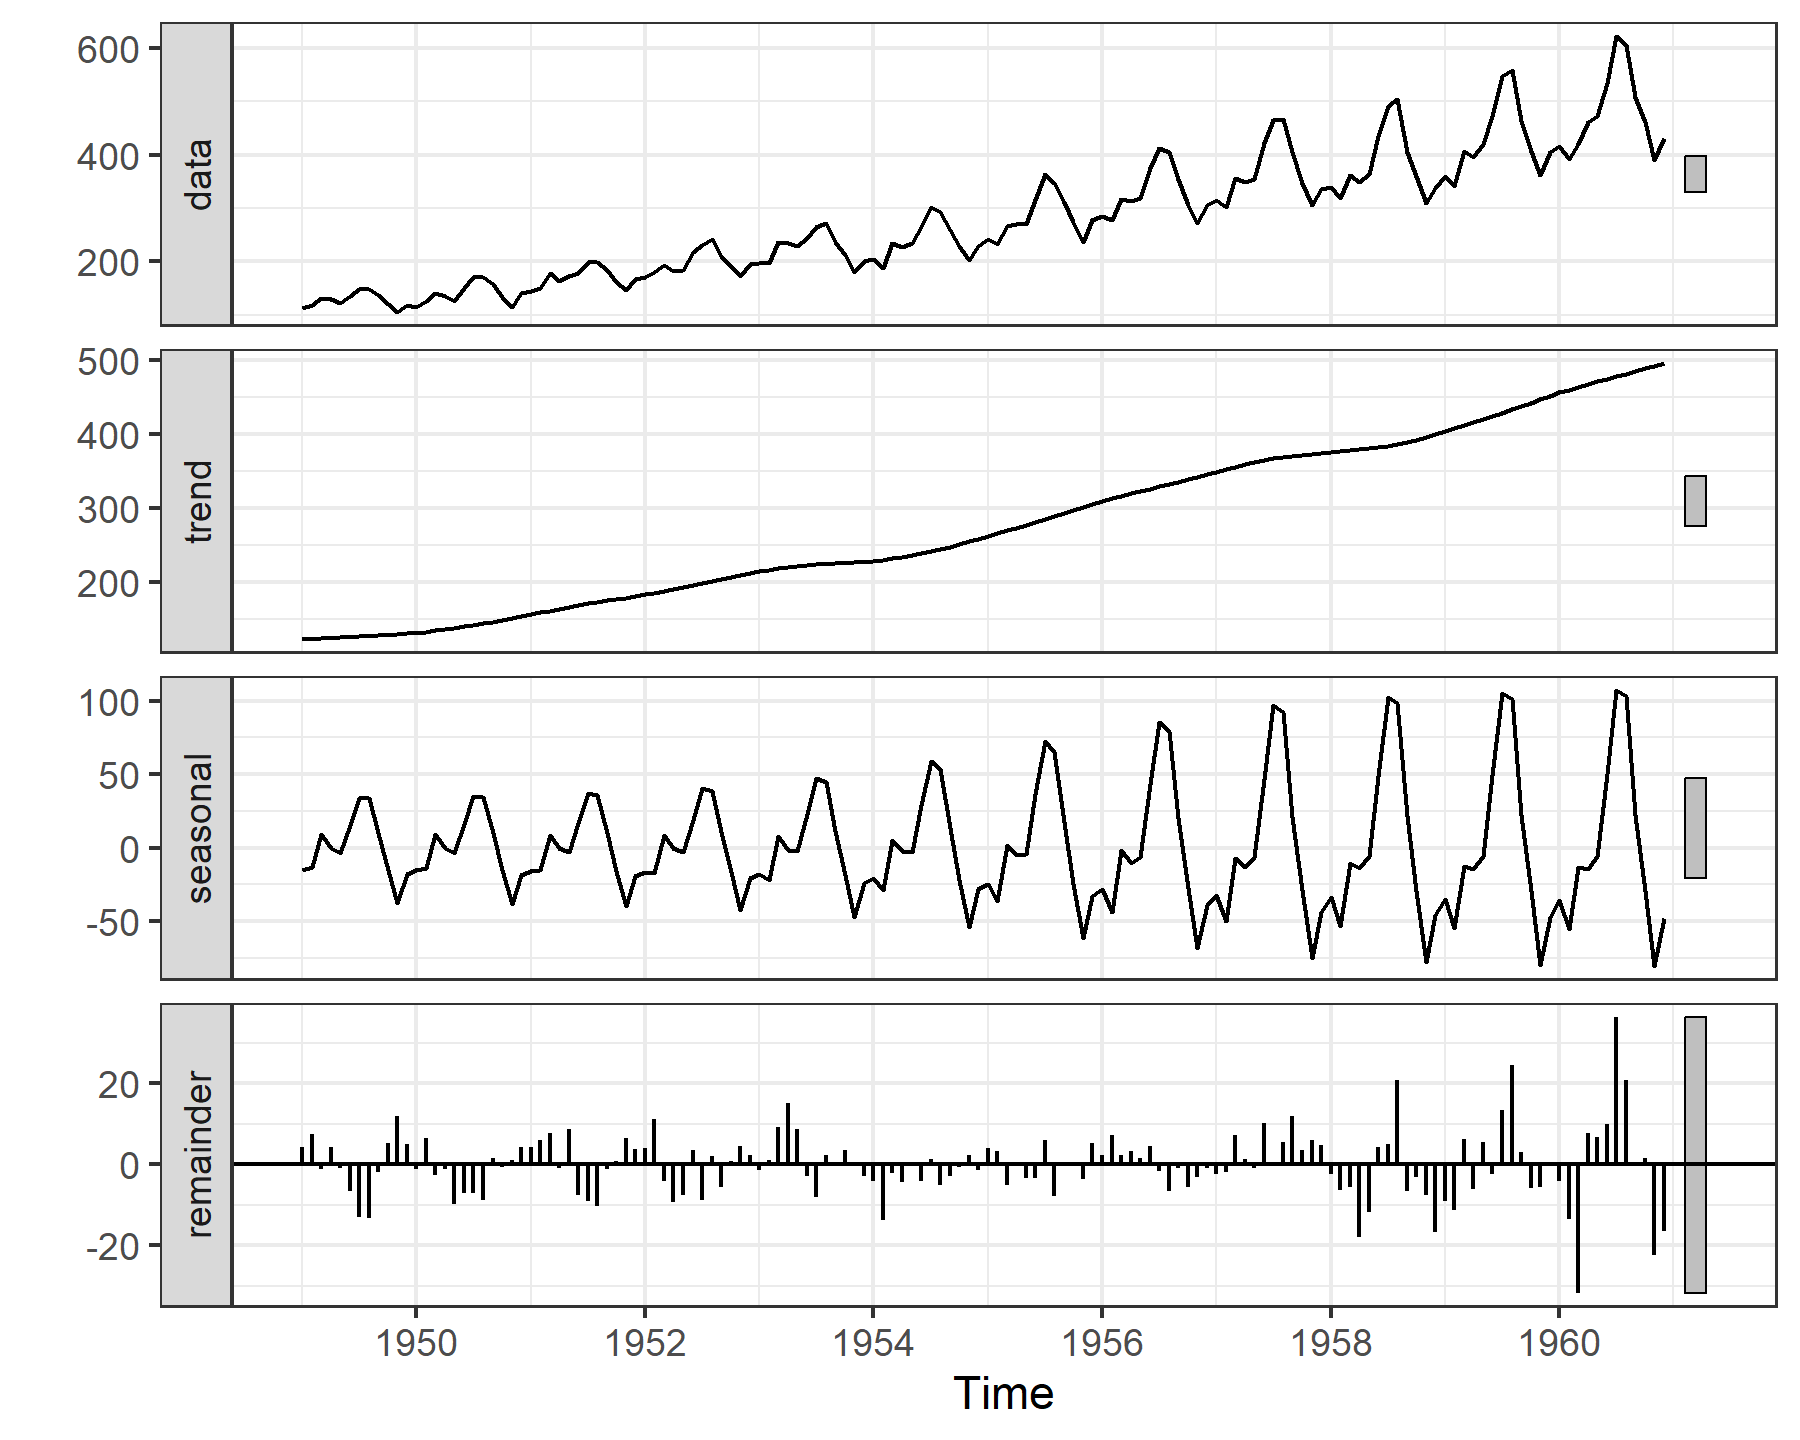 An STL decomposition of the AirPassengers dataset in R, useful for time series modeling and forecasting